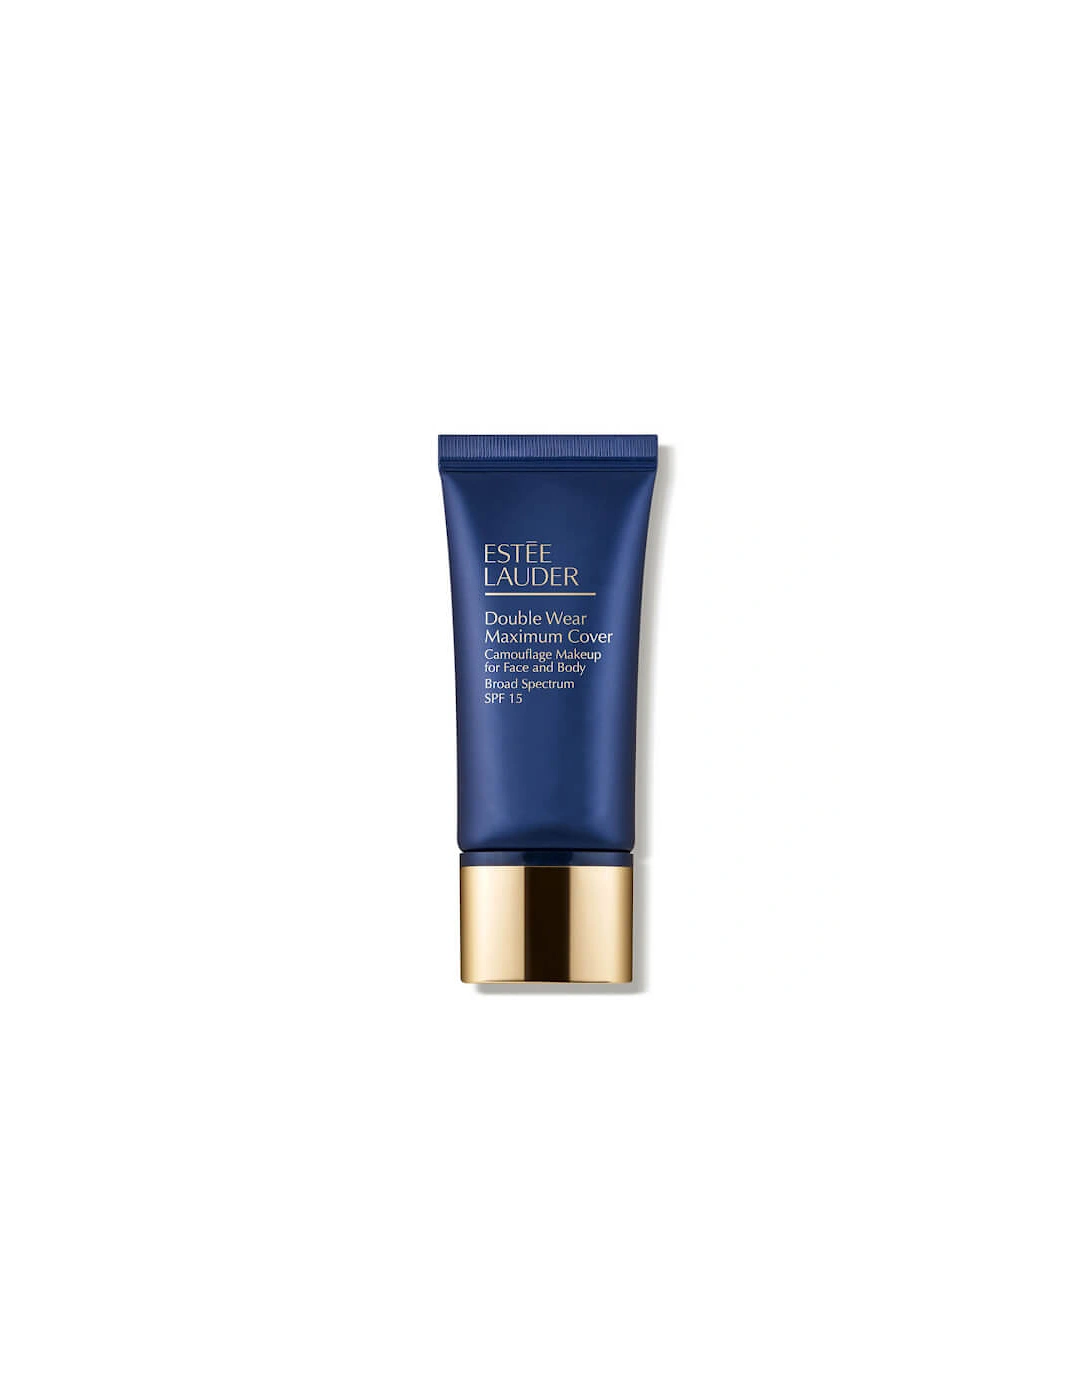 Estée Lauder Double Wear Maximum Cover Camouflage Makeup for Face and Body SPF15 - 2W1 Dawn, 2 of 1